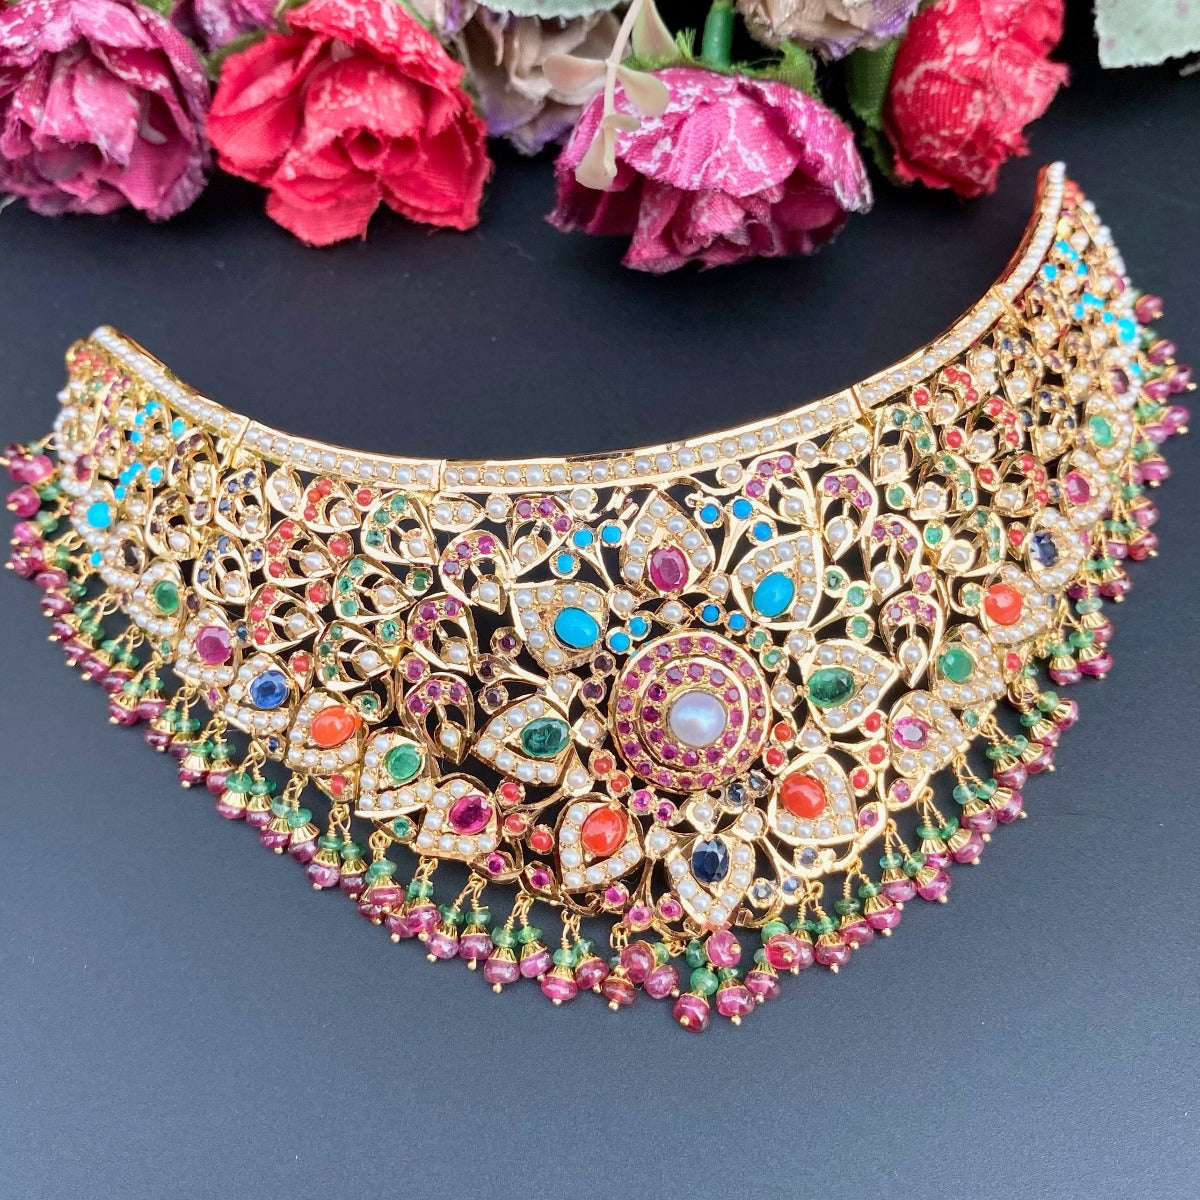 Bollywood navratna necklace in solid gold